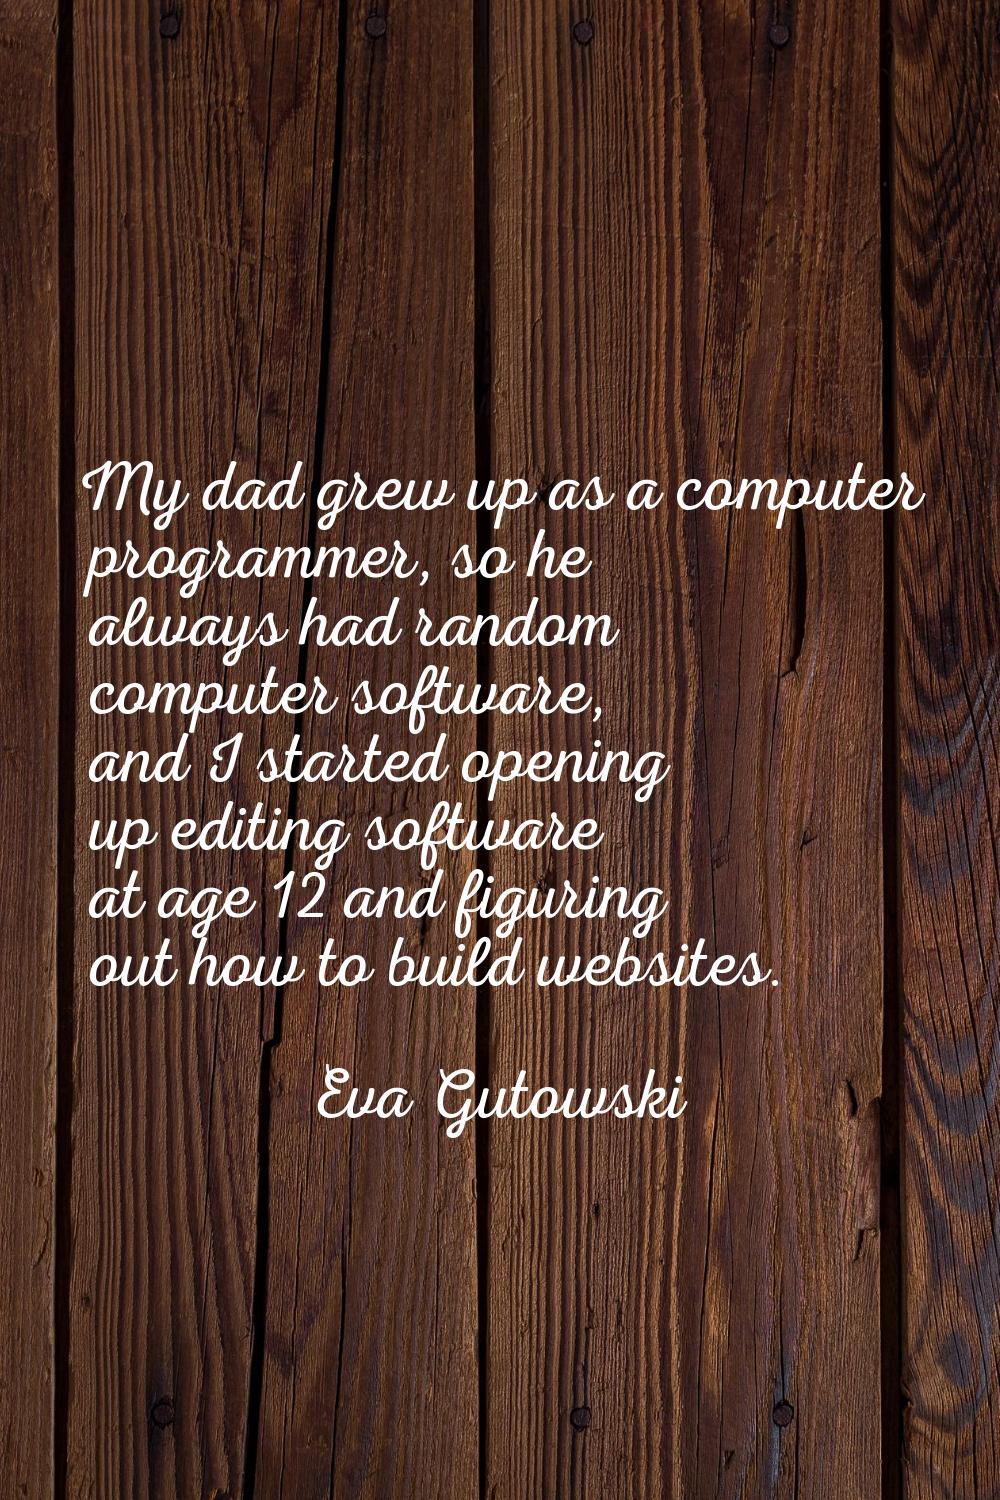 My dad grew up as a computer programmer, so he always had random computer software, and I started o